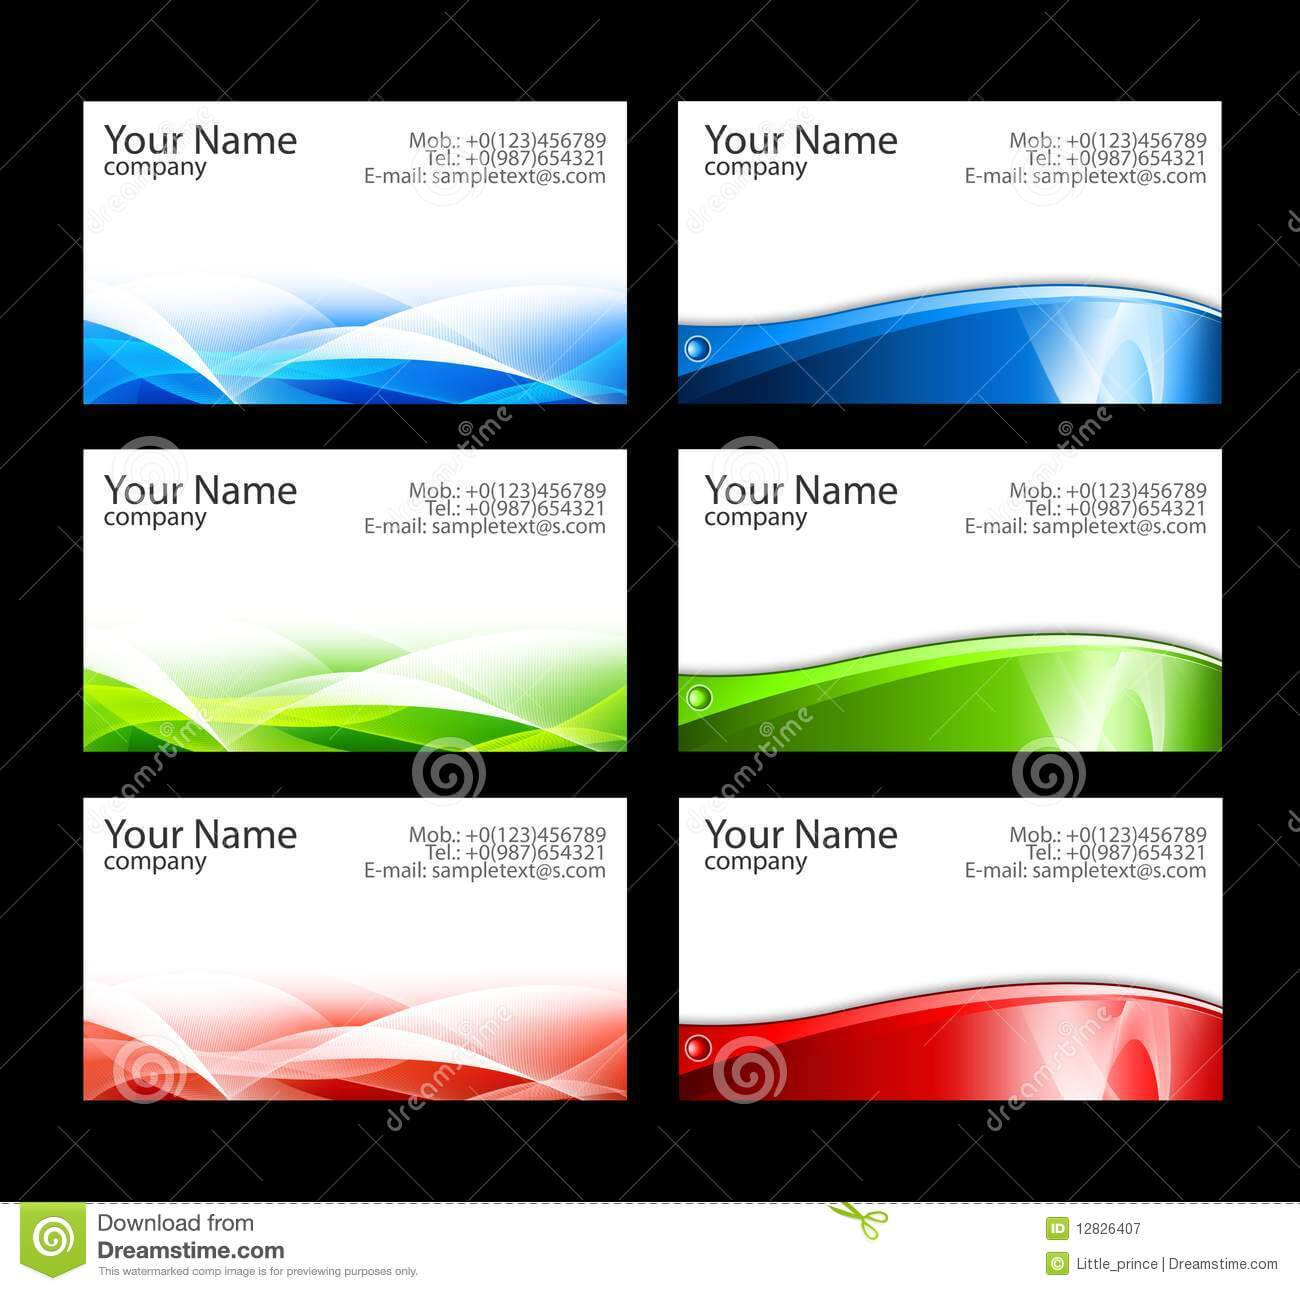 Business Cards Templates Stock Illustration. Illustration Of With Free Complimentary Card Templates